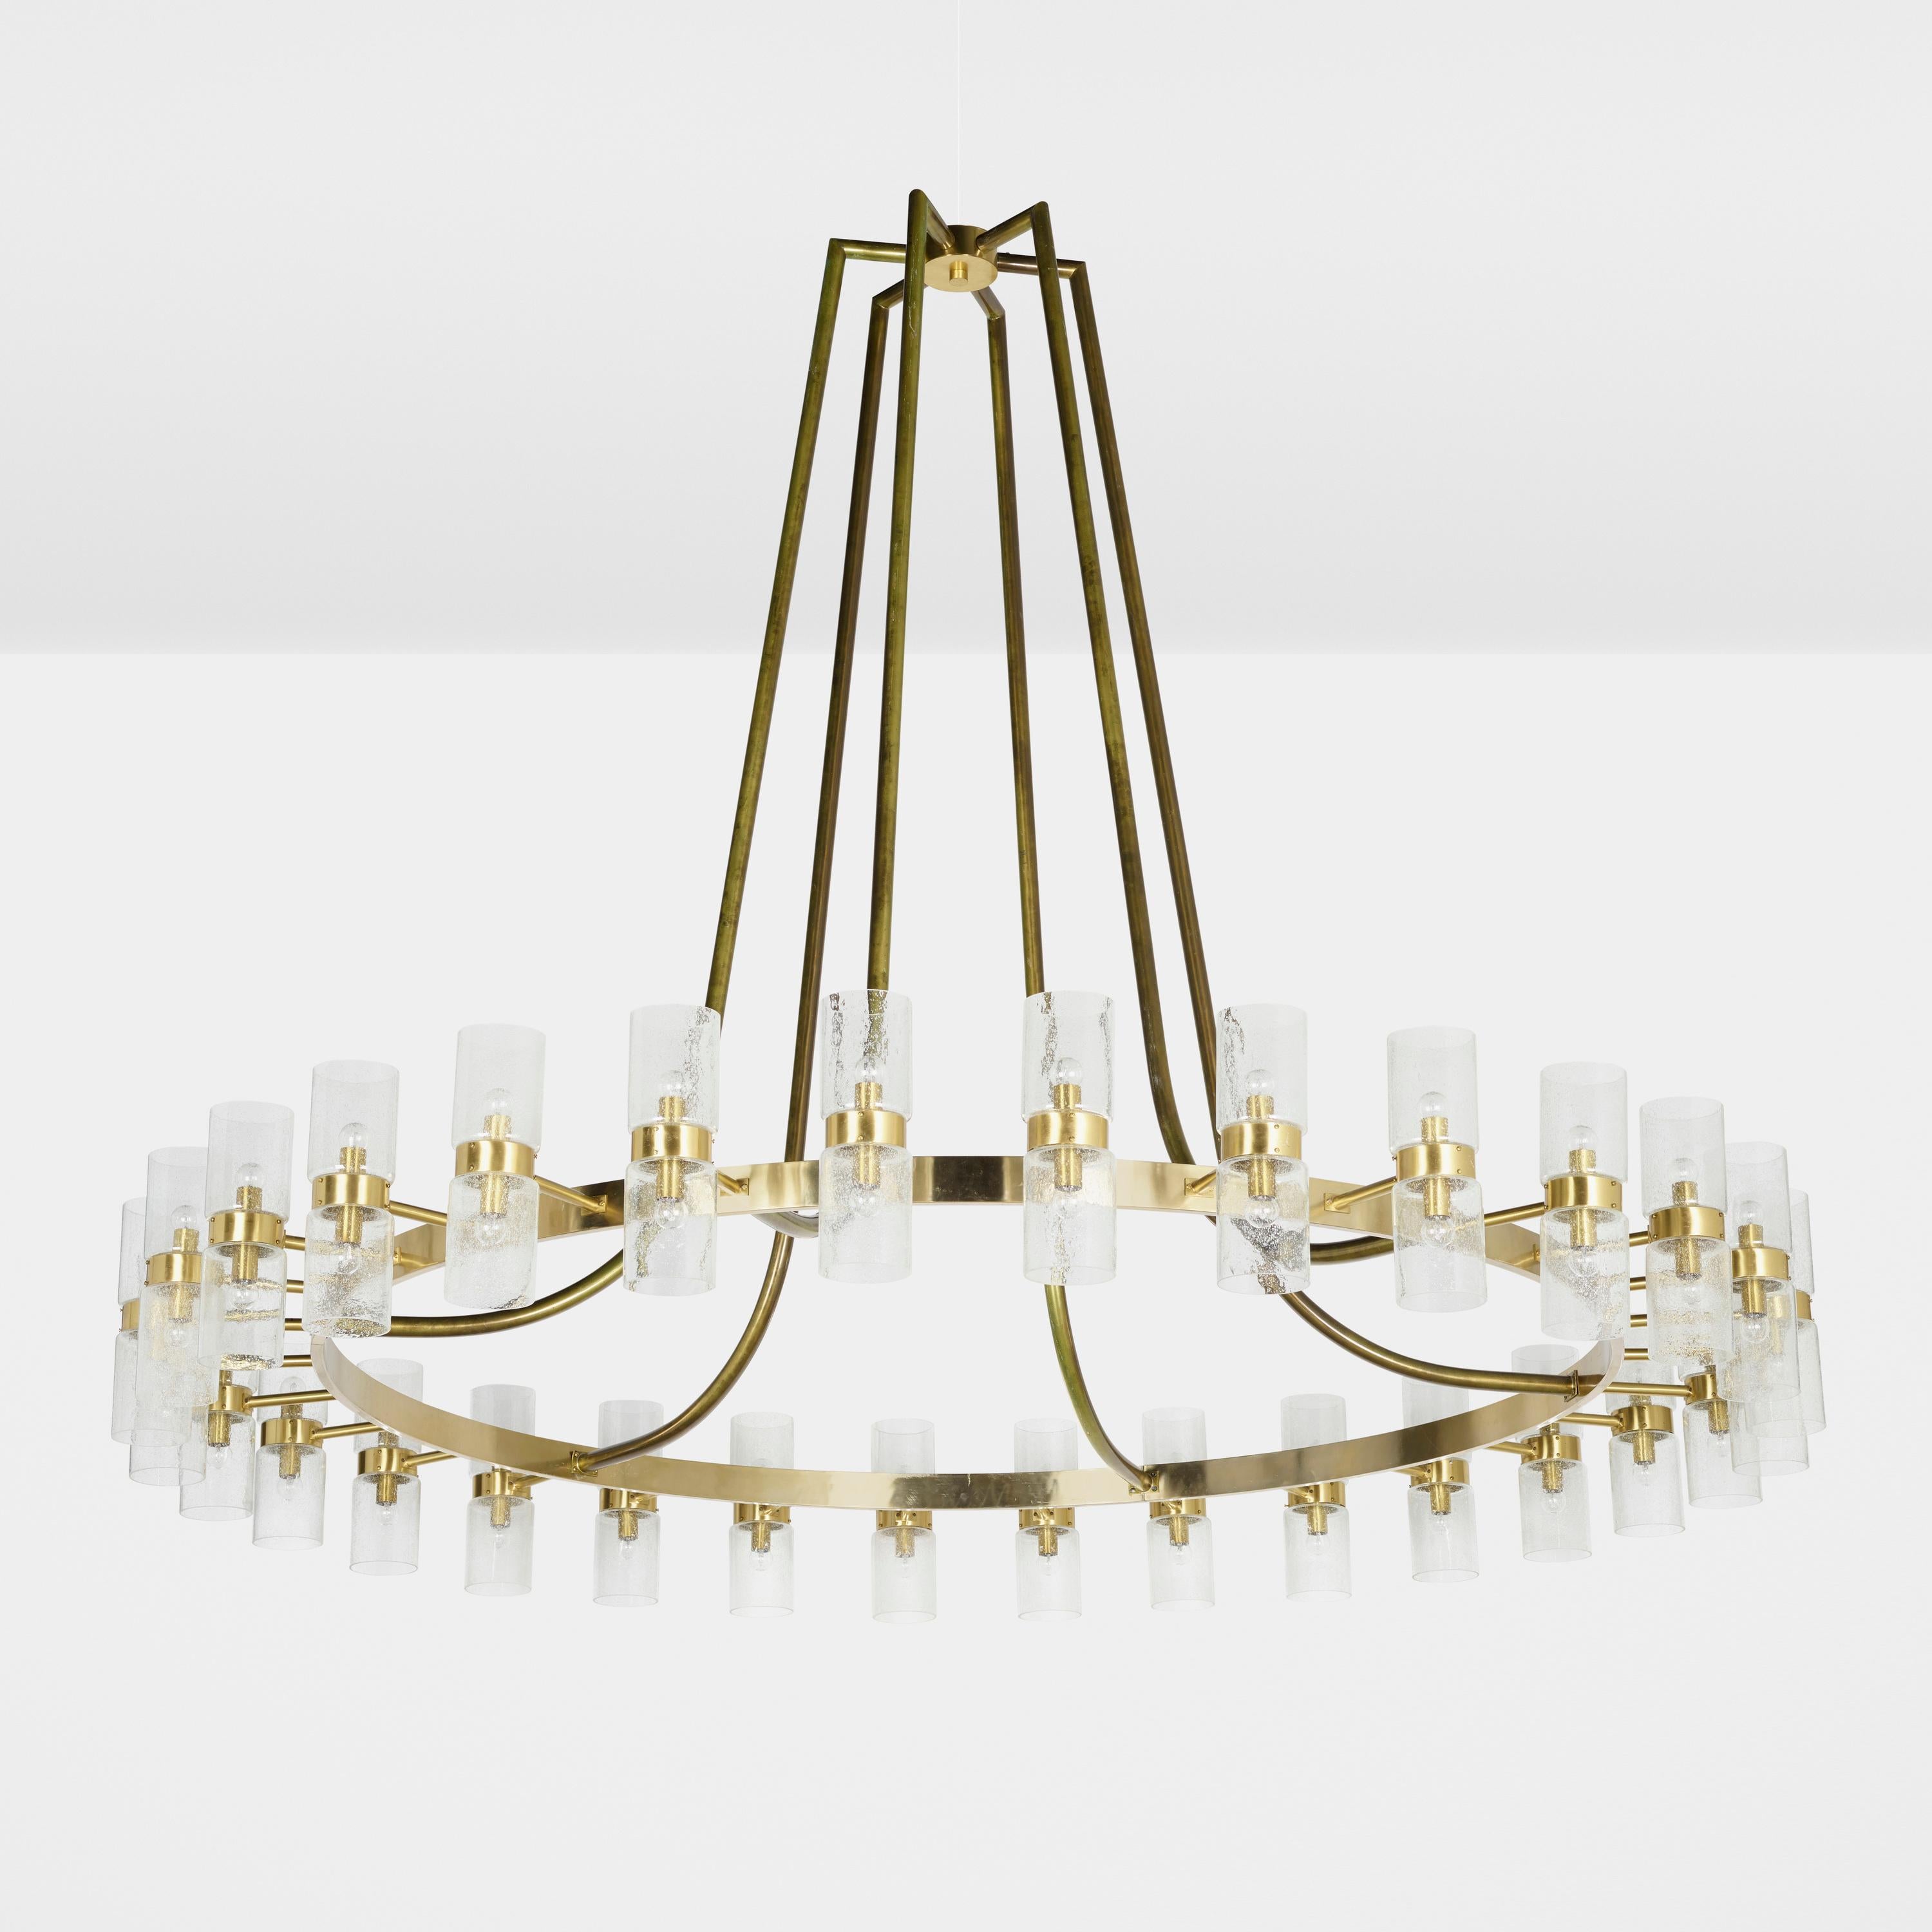 A monumental brass and glass chandelier designed and produced in Norway, c. 1965.